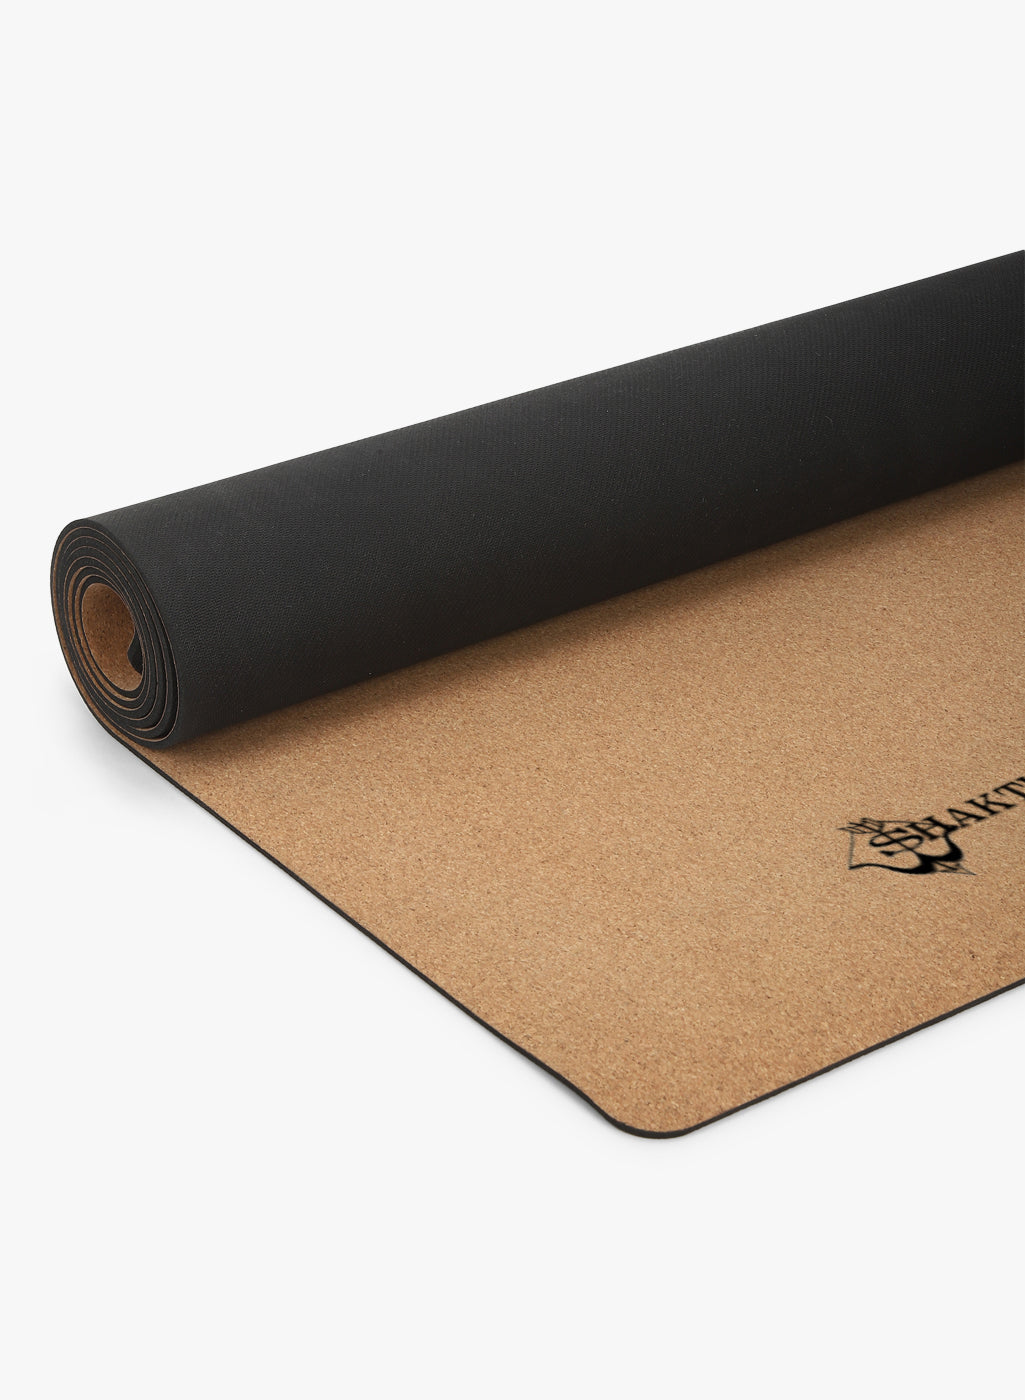 Shakti Warrior Mandala Cork Yoga Mat - Elevate balance and tranquility with this inspiring, eco-friendly mat. Order now for a mindful yoga experience!